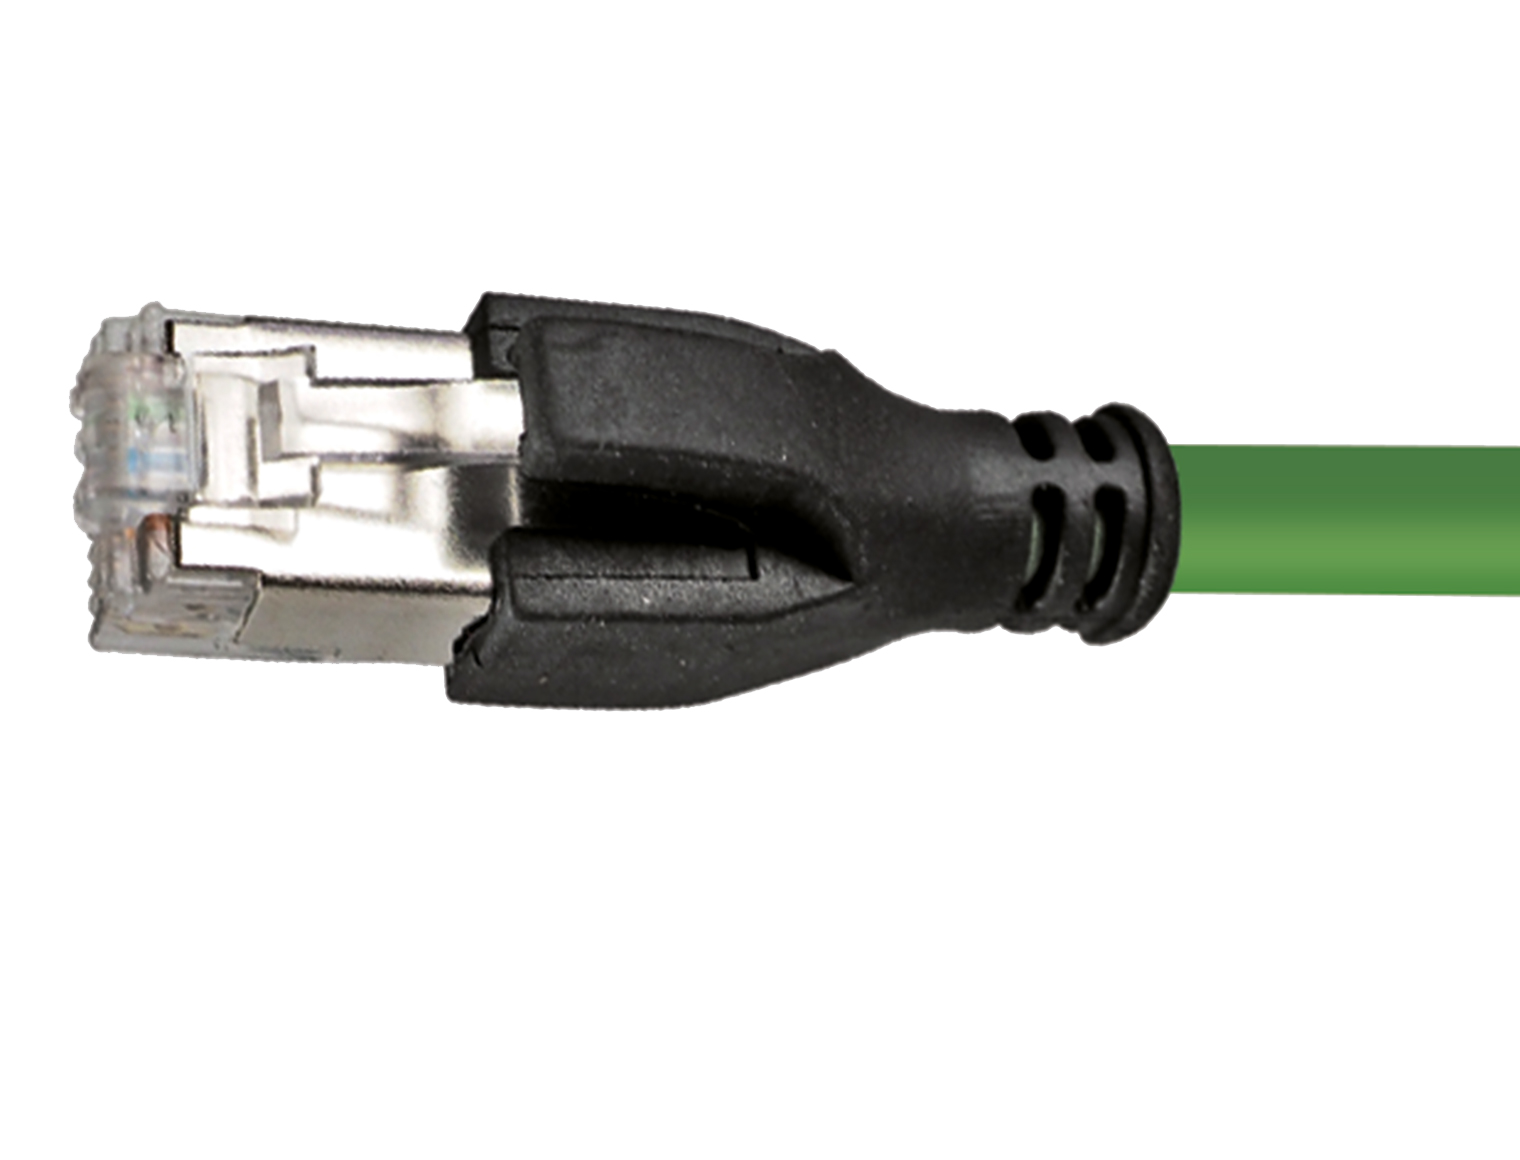 HELUKAT® CONNECTING SYSTEMS® INDUSTRY PROFInet C PUR RJ45 IP20 180°